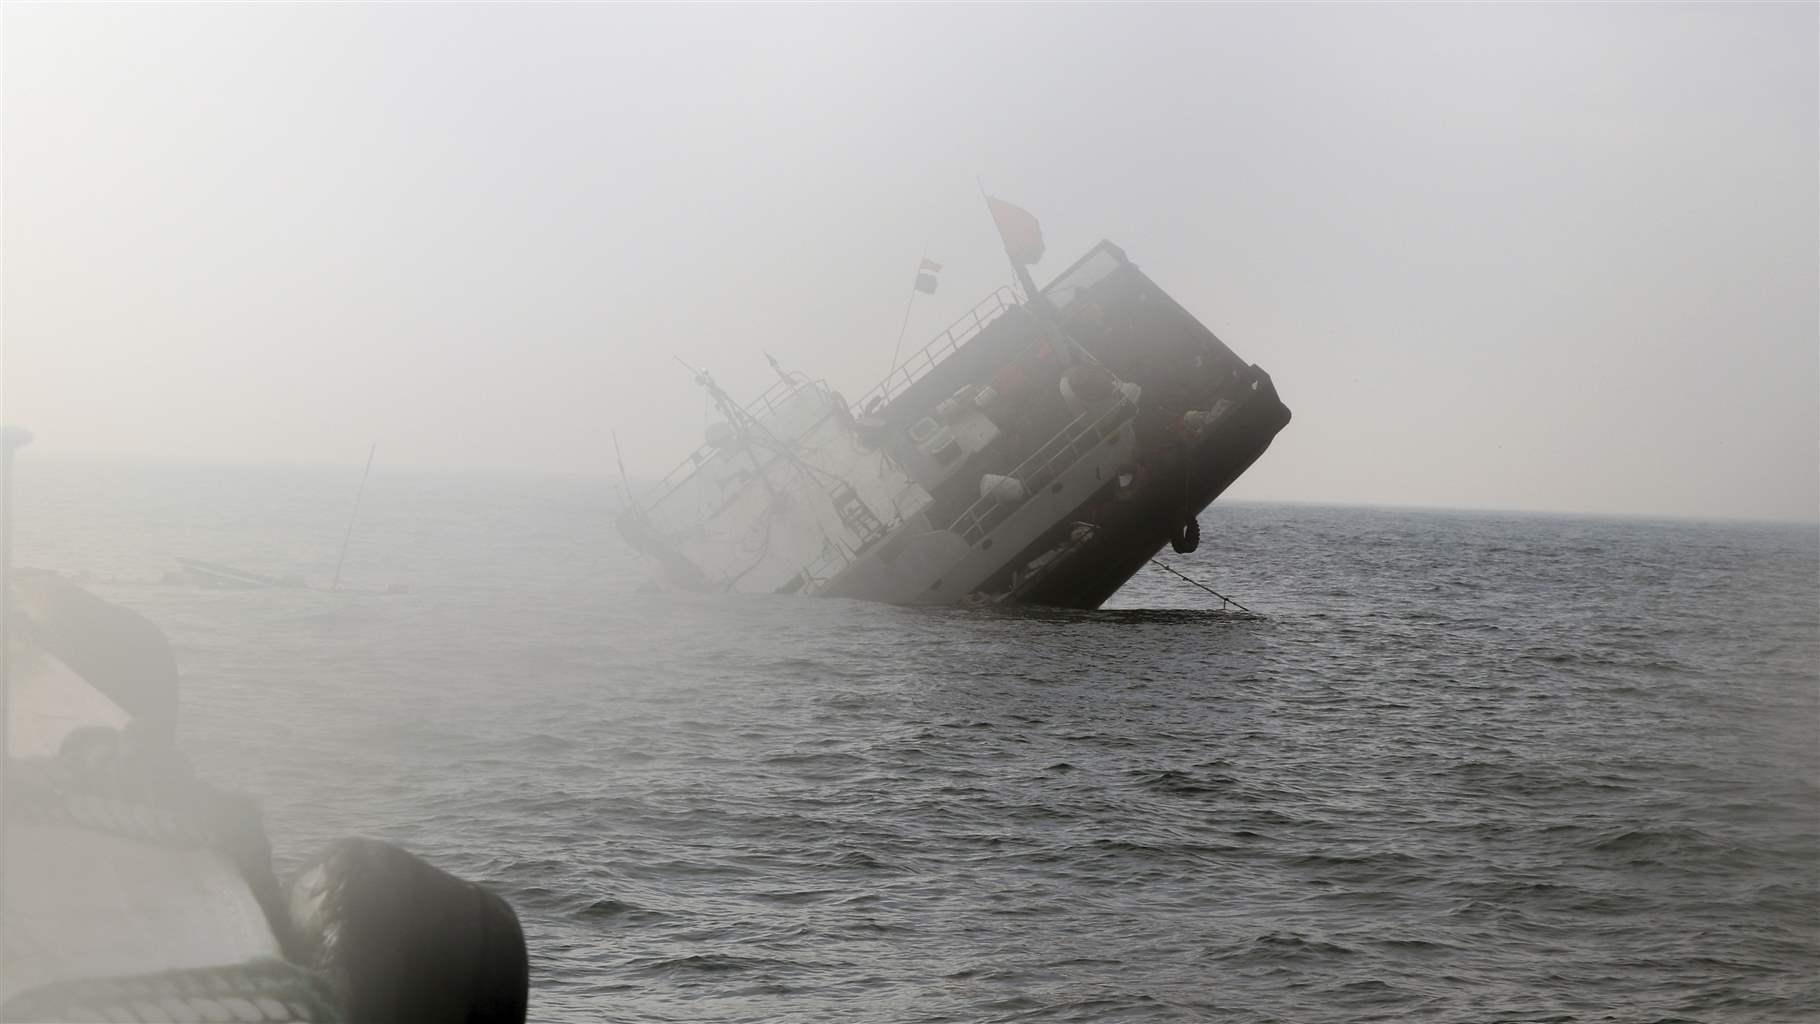 The fishing boats sinks due to the collision against island in Zhoushan city, east China's Zhejiang province, 22 August 2019. Crew of 13 sailors in a sinking fishing boat, which collides against island on the sea, are saved by local policemen in Zhoushan city, east China's Zhejiang province, 22 August 2019.